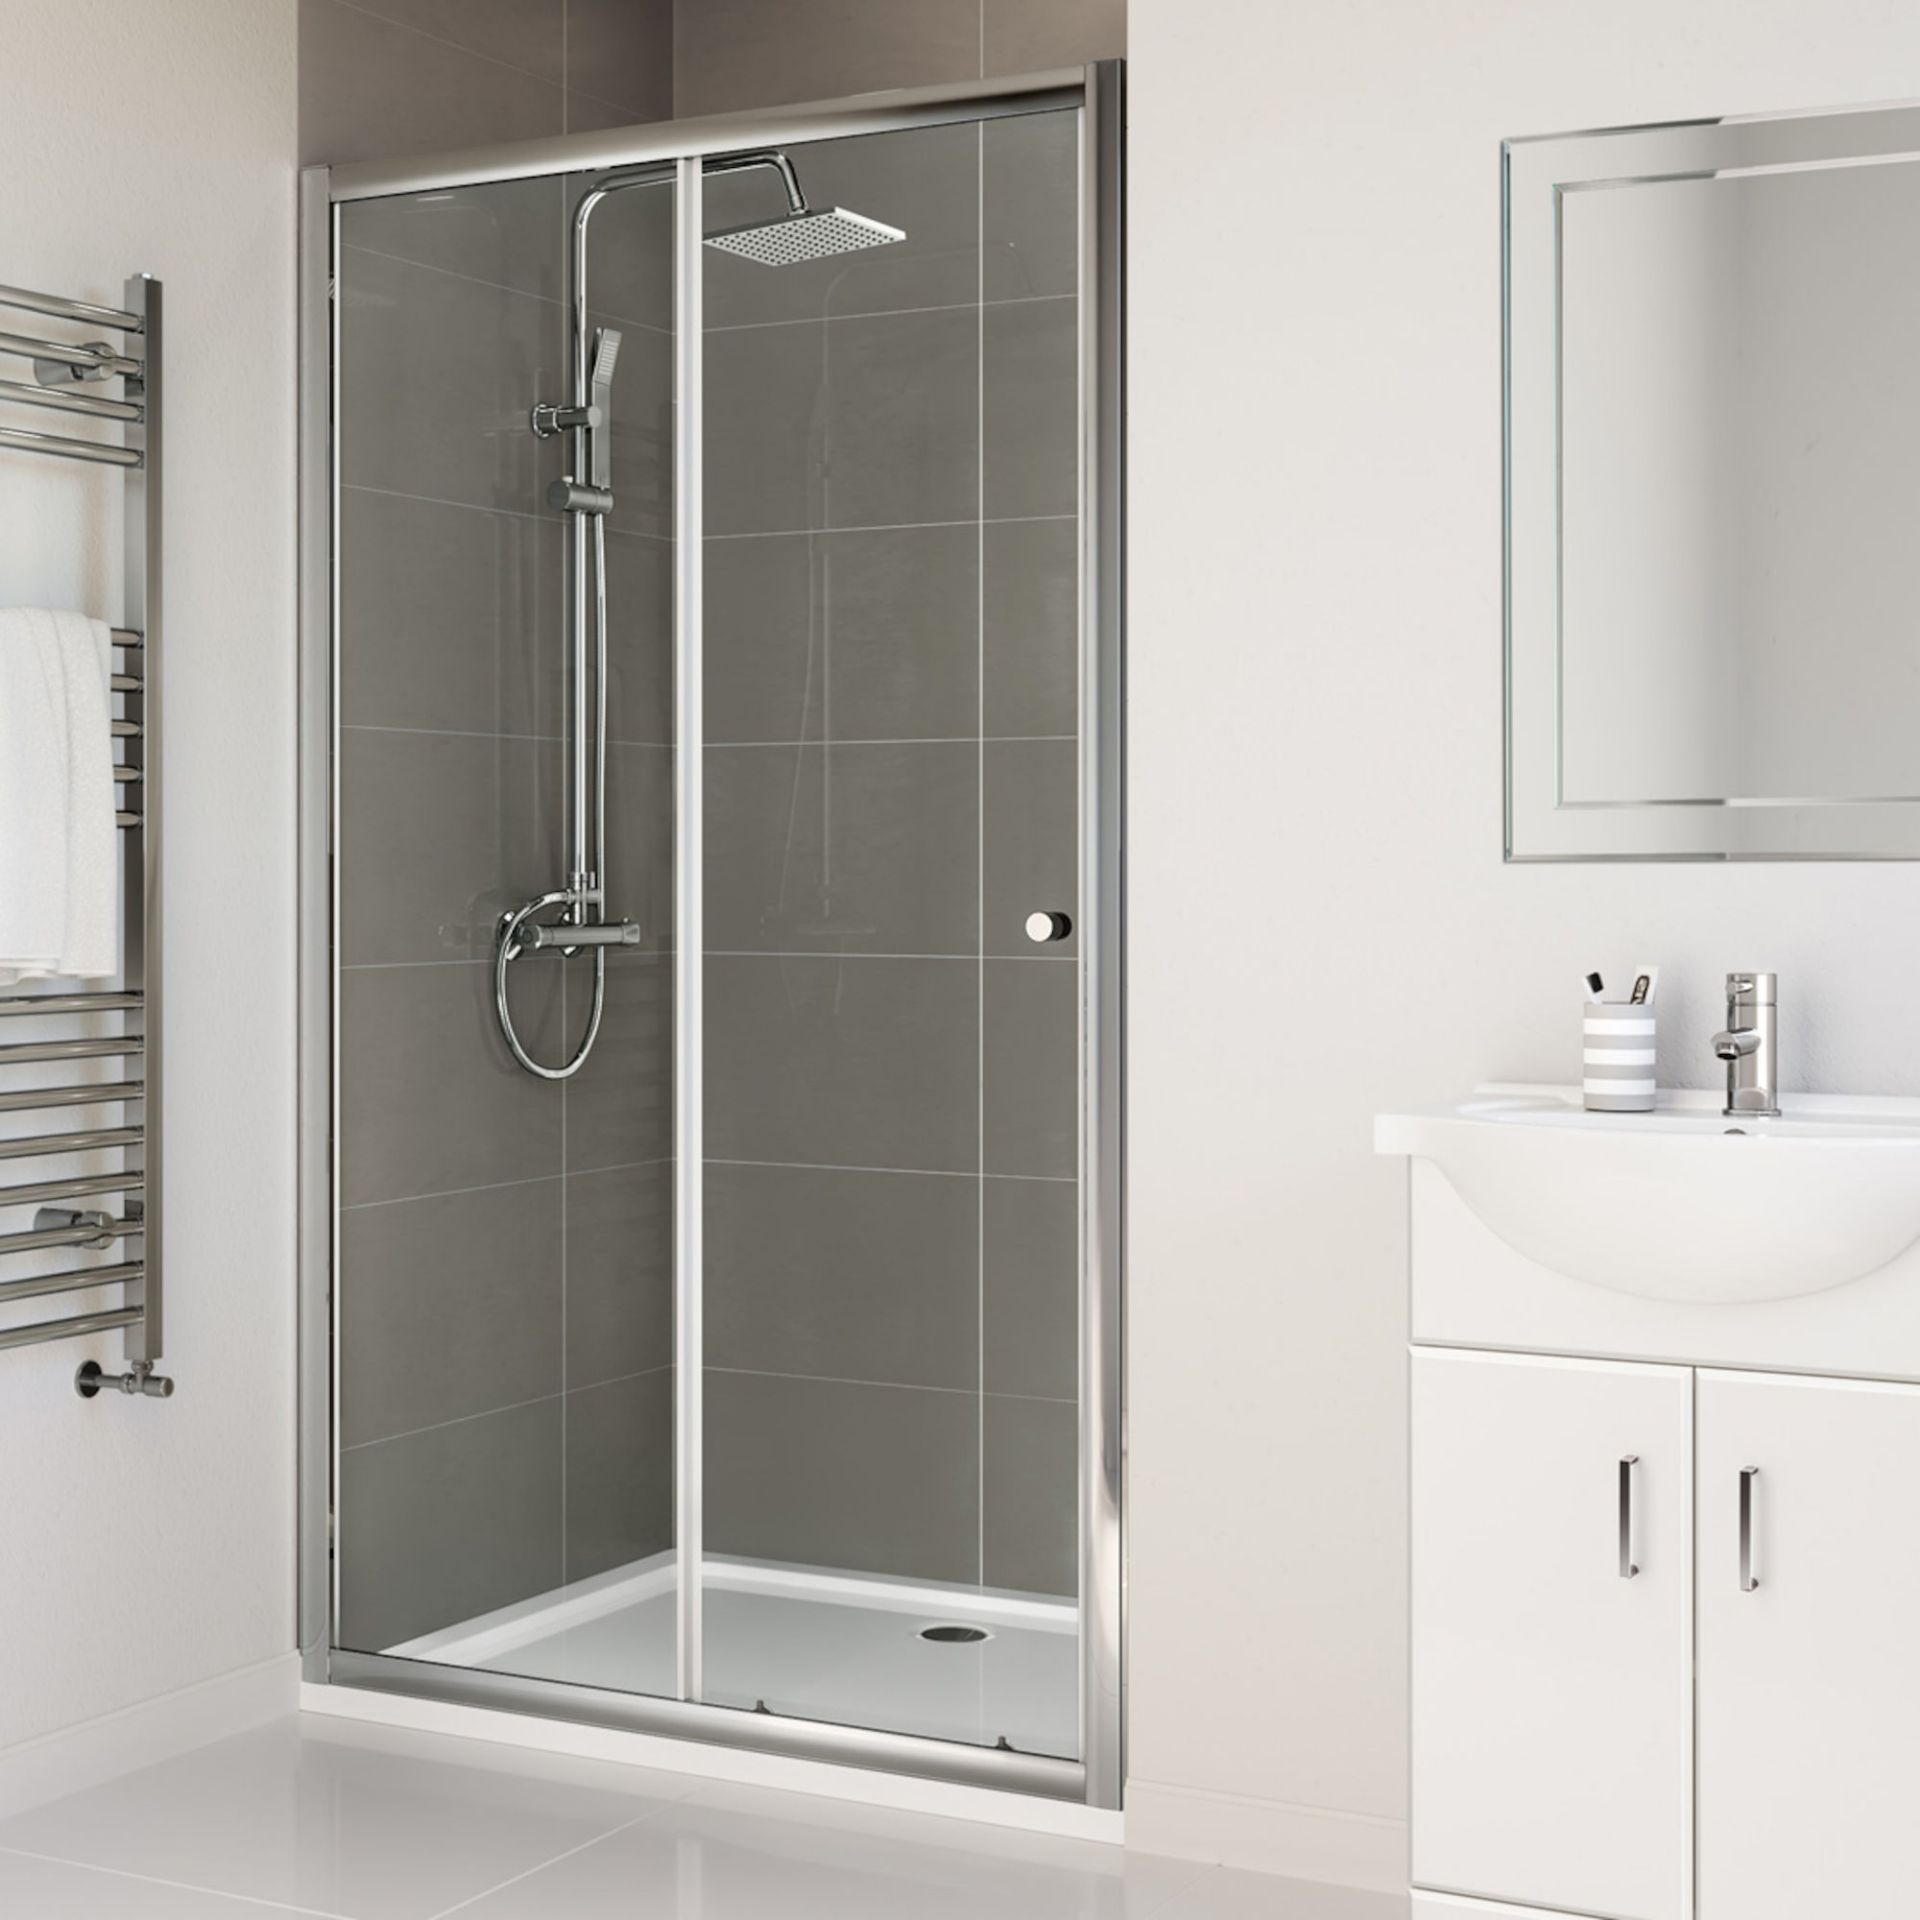 (CS197) 1000mm - Elements Sliding Shower Door. RRP £249.99. 4mm Safety Glass Fully waterproof tested